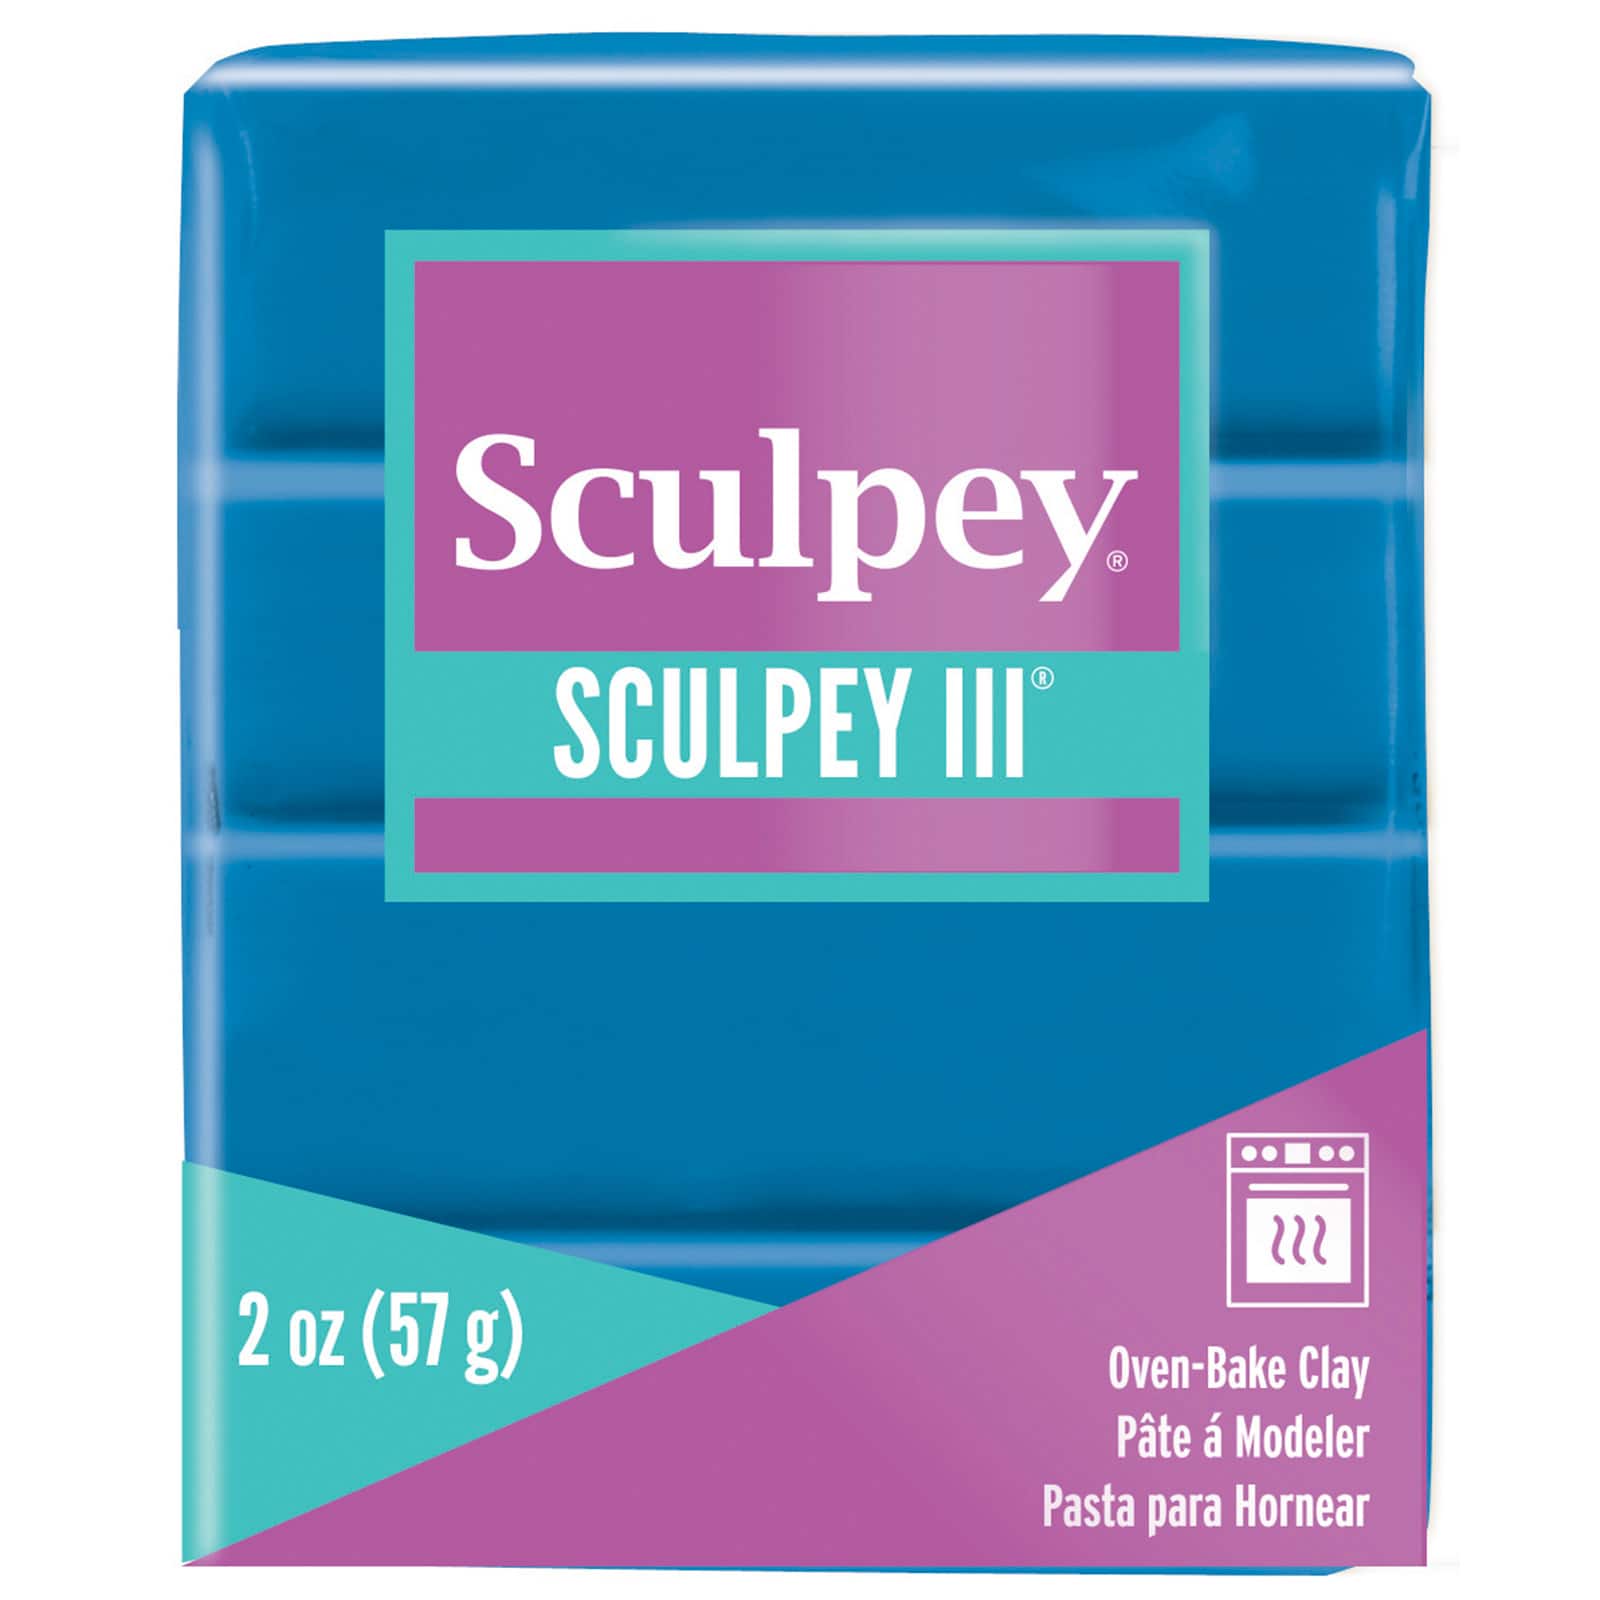 Sculpey III Polymer Clay - Turquoise 2oz